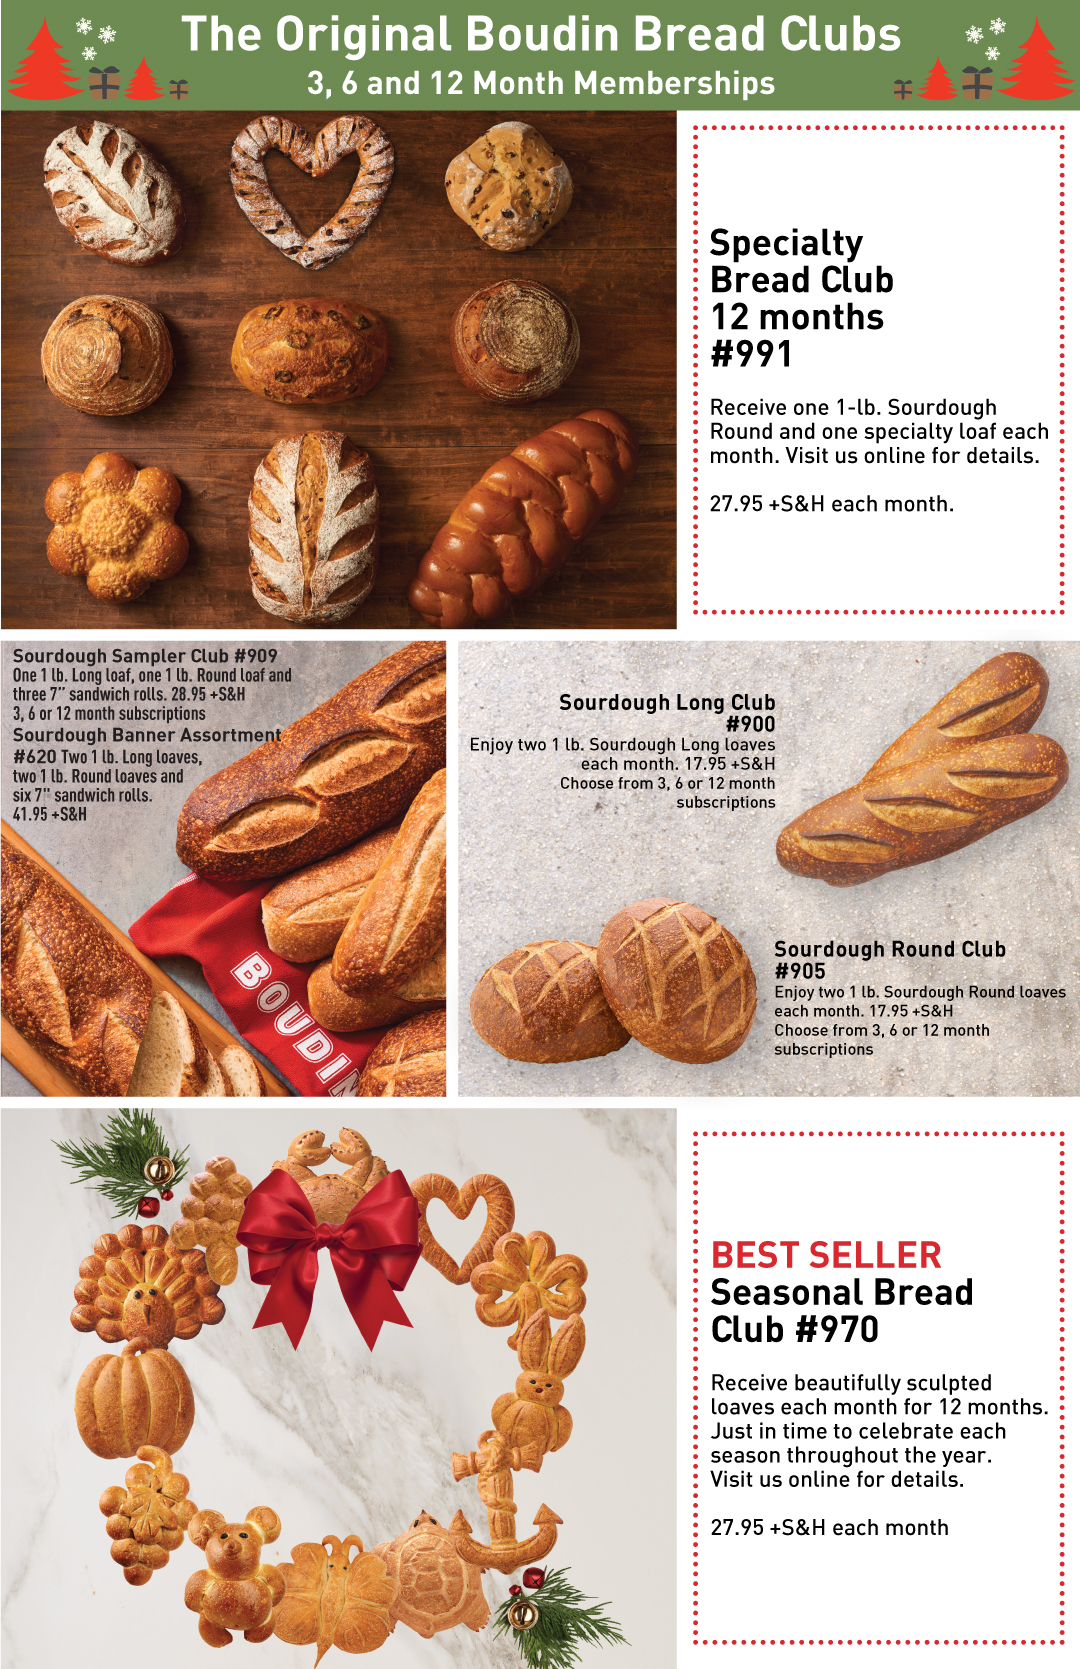 Specialty Bread Club 12 Months #991 with assortment of breads on wood surface and priced at 27.95 +S&H each month. Sourdough Sampler #909 gift priced at 28.95 +S&H for 3, 6 or 12 month subscriptions. Sourdough Banner Assortment #620 with an assortment of Sourdough Breads on concrete surface and priced at 41.95 +S&H. Sourdough Long Club #900 with 2 Sourdough Longs on concrete surface and priced at 17.95 +S&H for 3, 6 or 12 month subscriptions. Sourdough Round Club #905 with 2 Sourdough Rounds on concrete surface and priced at 17.95 +S&H for 3, 6 or 12 month subscriptions. Seasonal Bread Club #970 with an assortment of Sourdough Critter Breads on marble surface and priced at 27.95 +S&H each month.